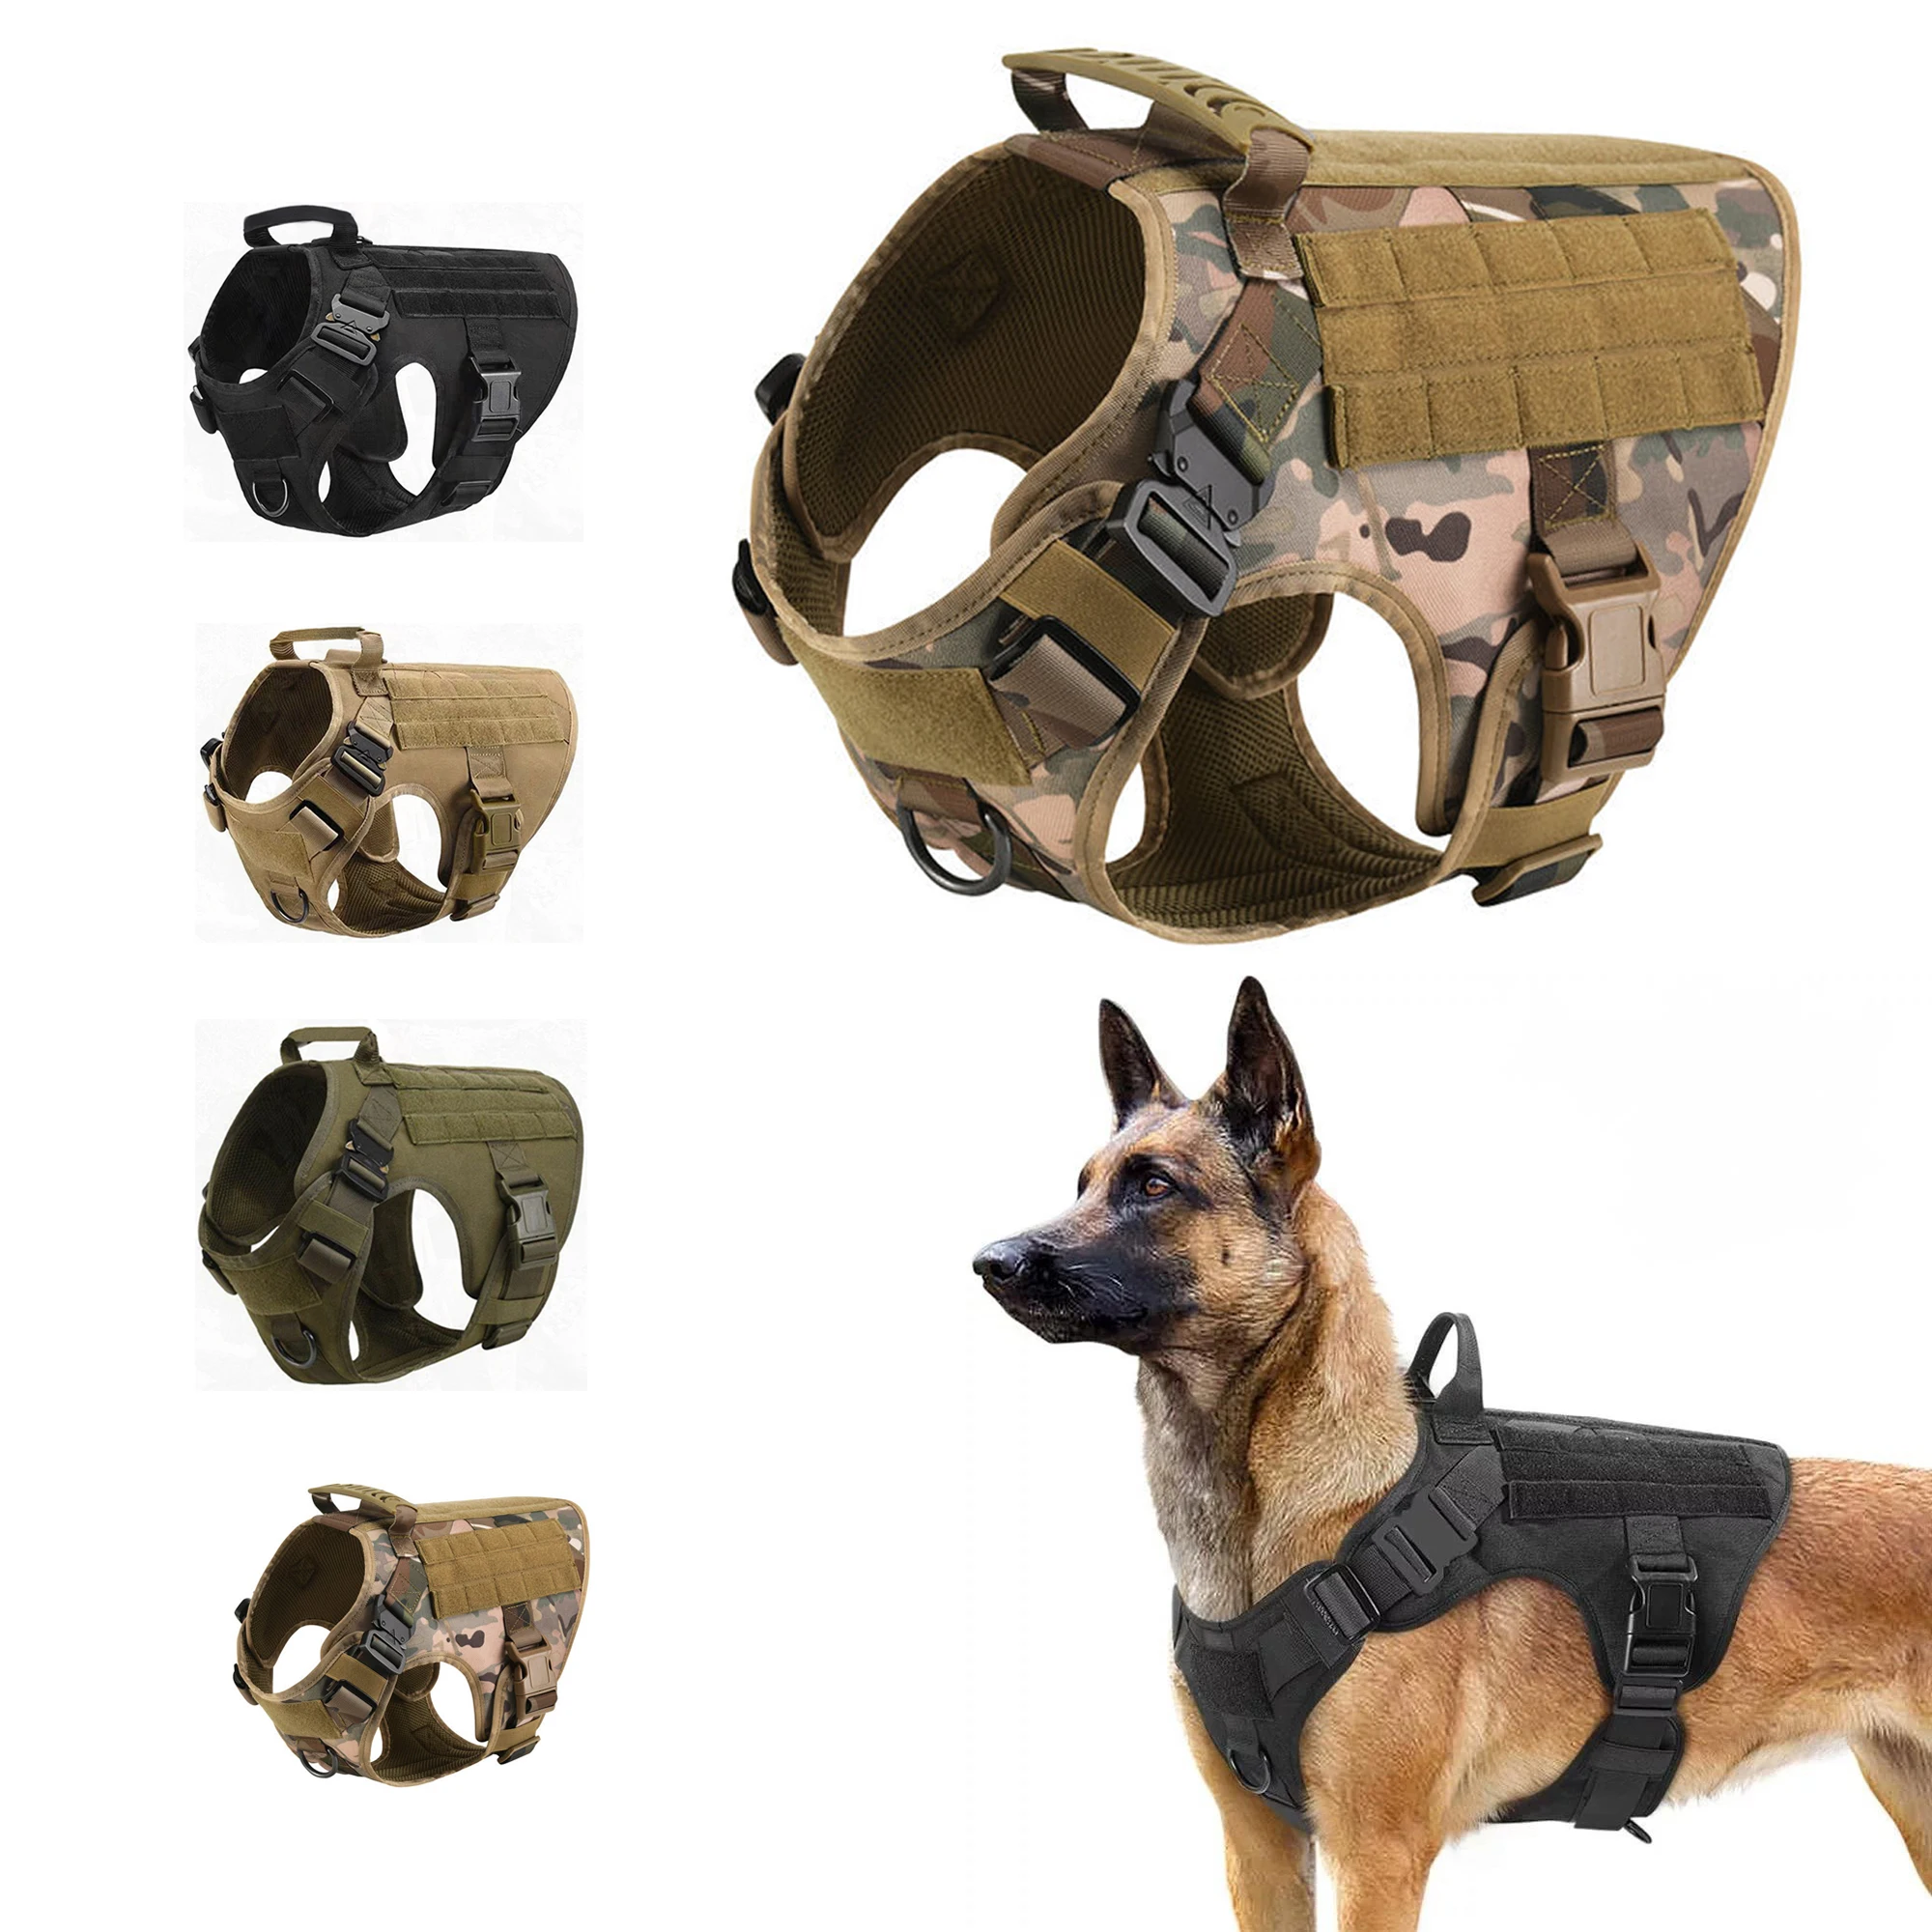 

Tactical Dog Harness Leash Metal Buckle MOLLE German Shepherd Pet Large Big Dogs Military Training K9 Padded Quick Release Vest